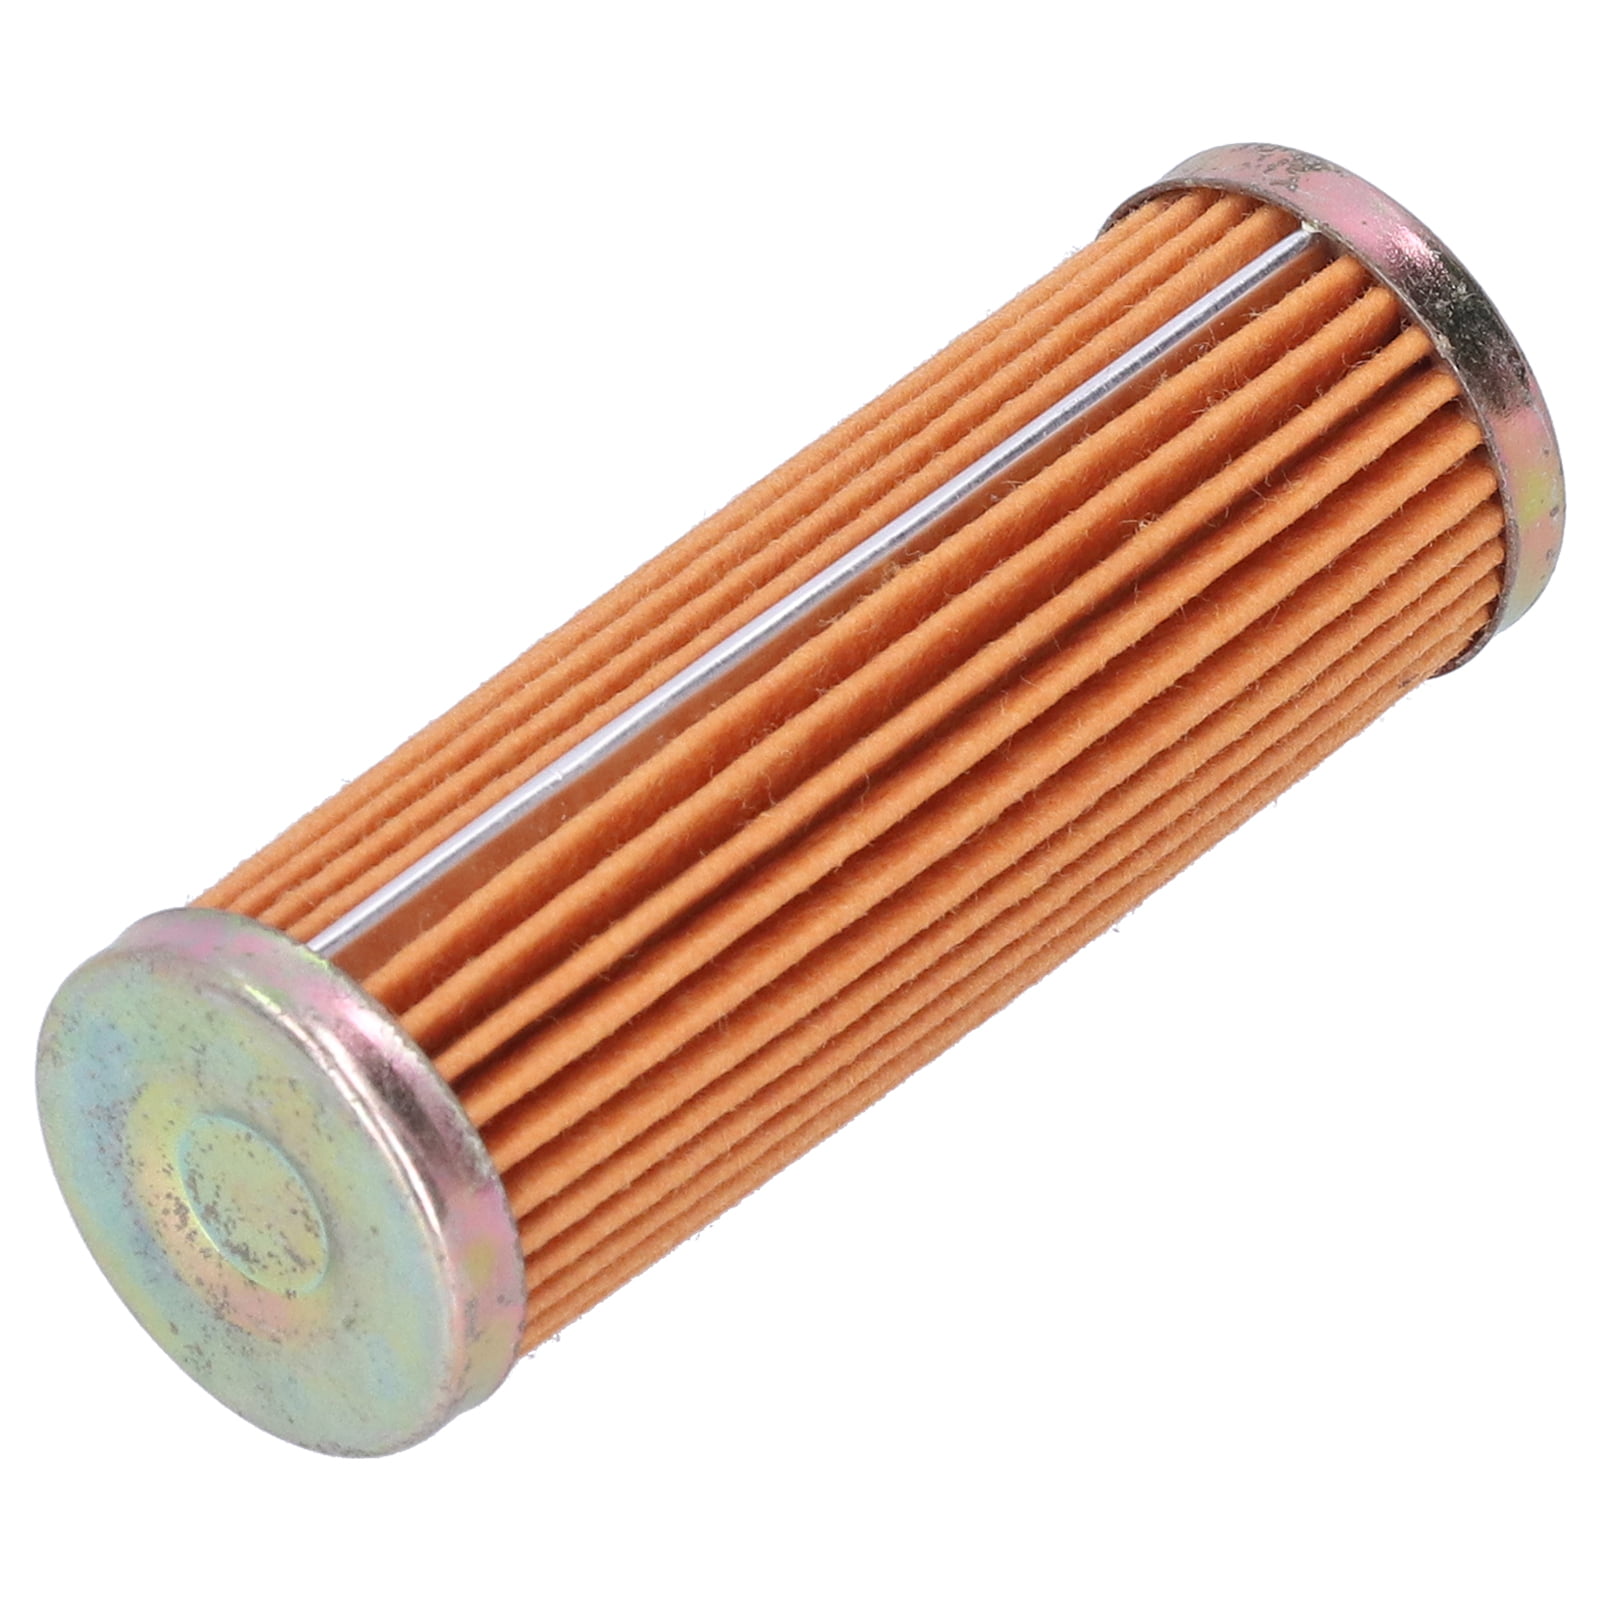 HIFROM Fuel Filter Replacement for KUBOTA B1550 B1700 B1750 B1750HST B20 B21 B2100 B2100DT B2150 B2400 B2400 B4200 B5100 B5200 B6000 B6100 15231-43560 1T021-43560 14301-12470 Pack of 3 